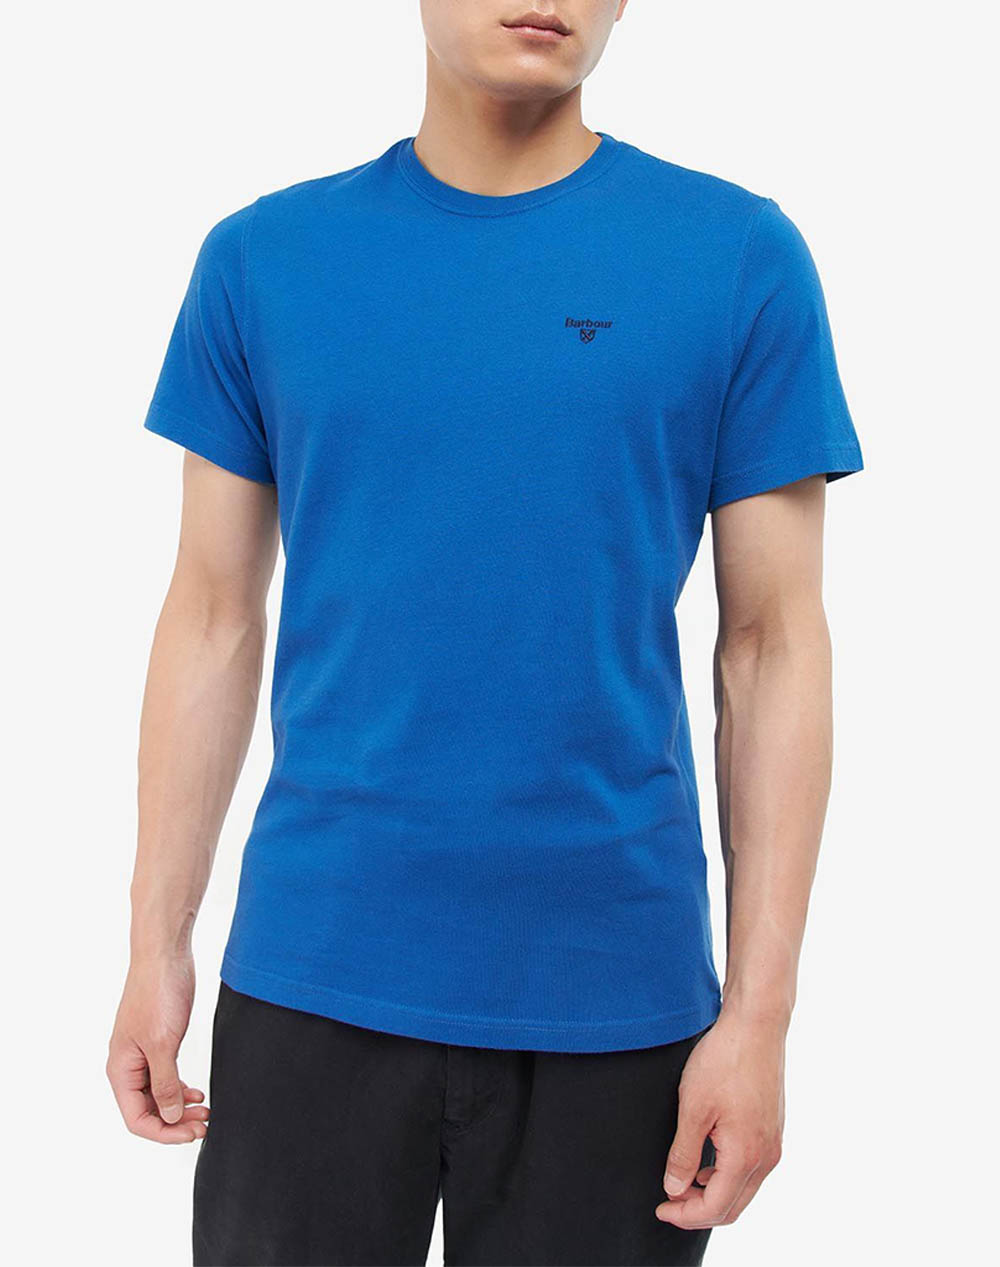 BARBOUR ΜΠΛΟΥΖΑ T-SHIRT Κ/Μ ESSENTIAL SPORTS TEE MTS0331-BRBL26 Blue 3820ABARB3400047_XR21519